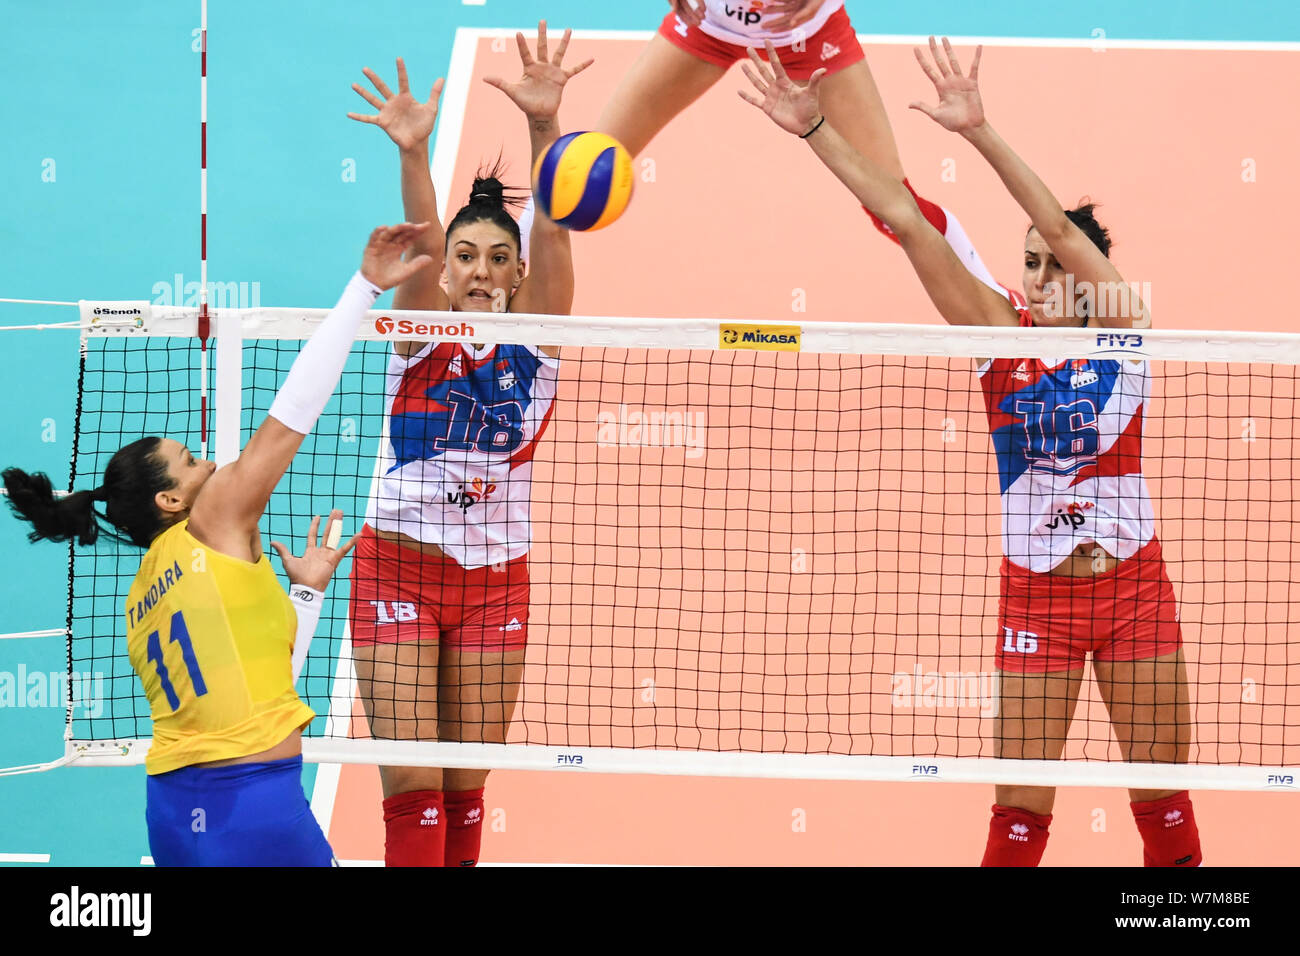 Tandara Caixeta of Brazil spikes against Tijana Boskovic and Milena Rasic of Serbia during their match of the FIVB Volleyball World Grand Prix Finals Stock Photo